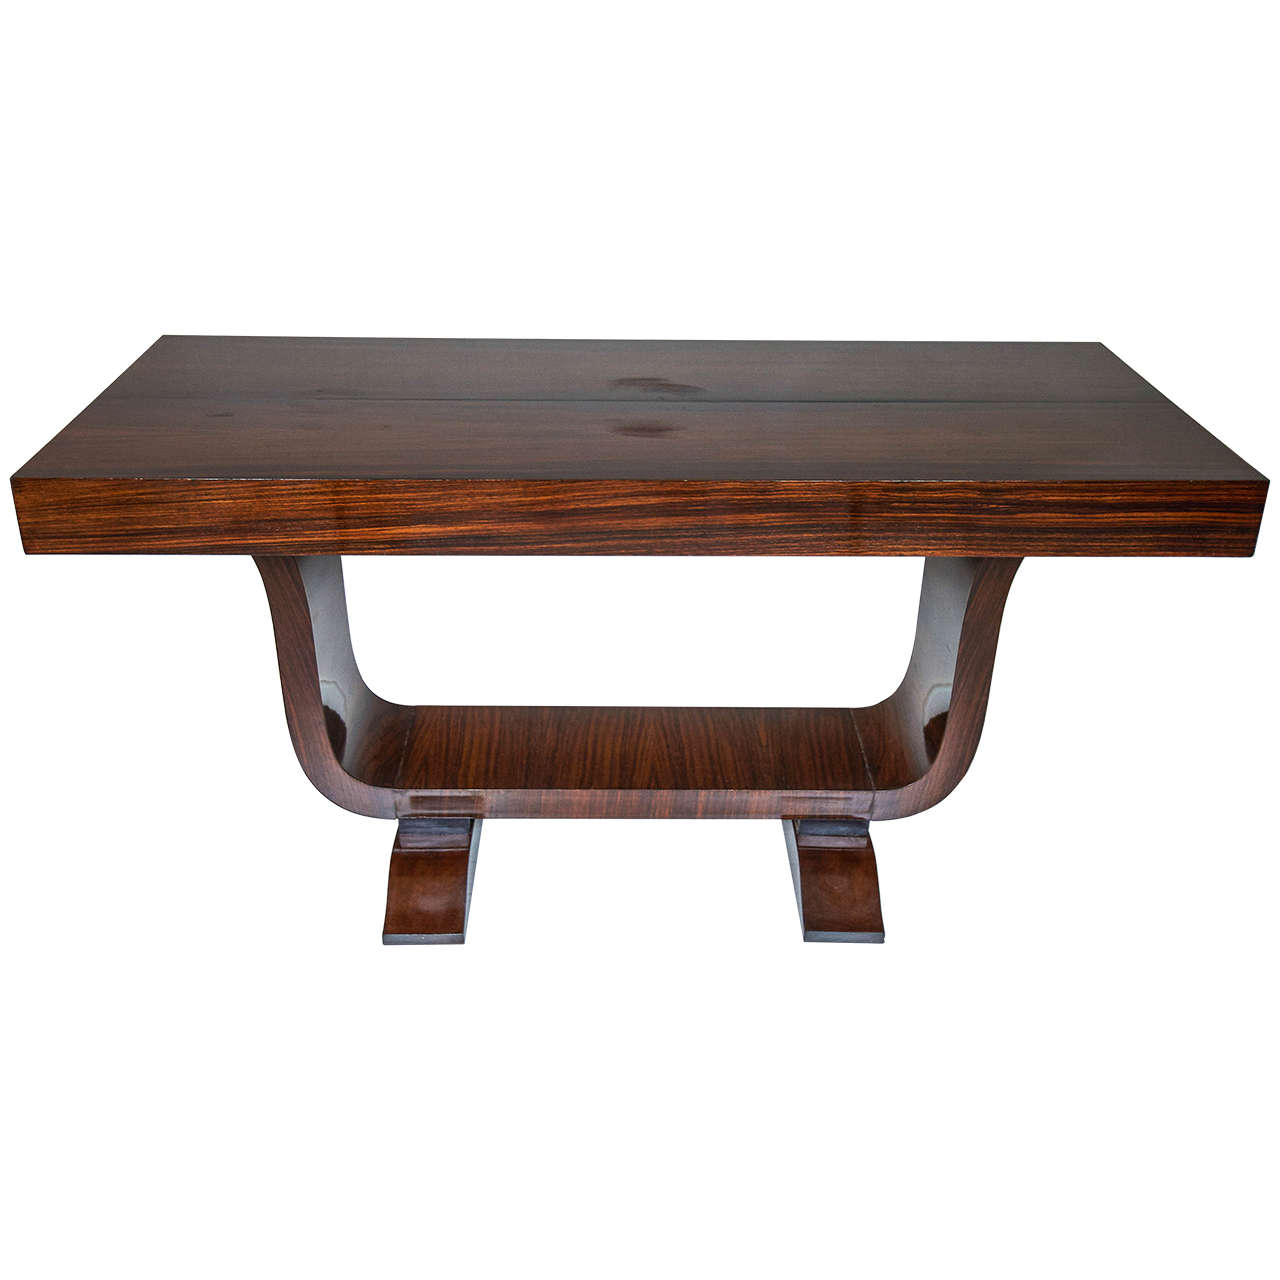 Beautiful rosewood console table, finished on both the sides, can be put on the center of the room or used like a desk.
Two moustache bases sustains a curved bend.